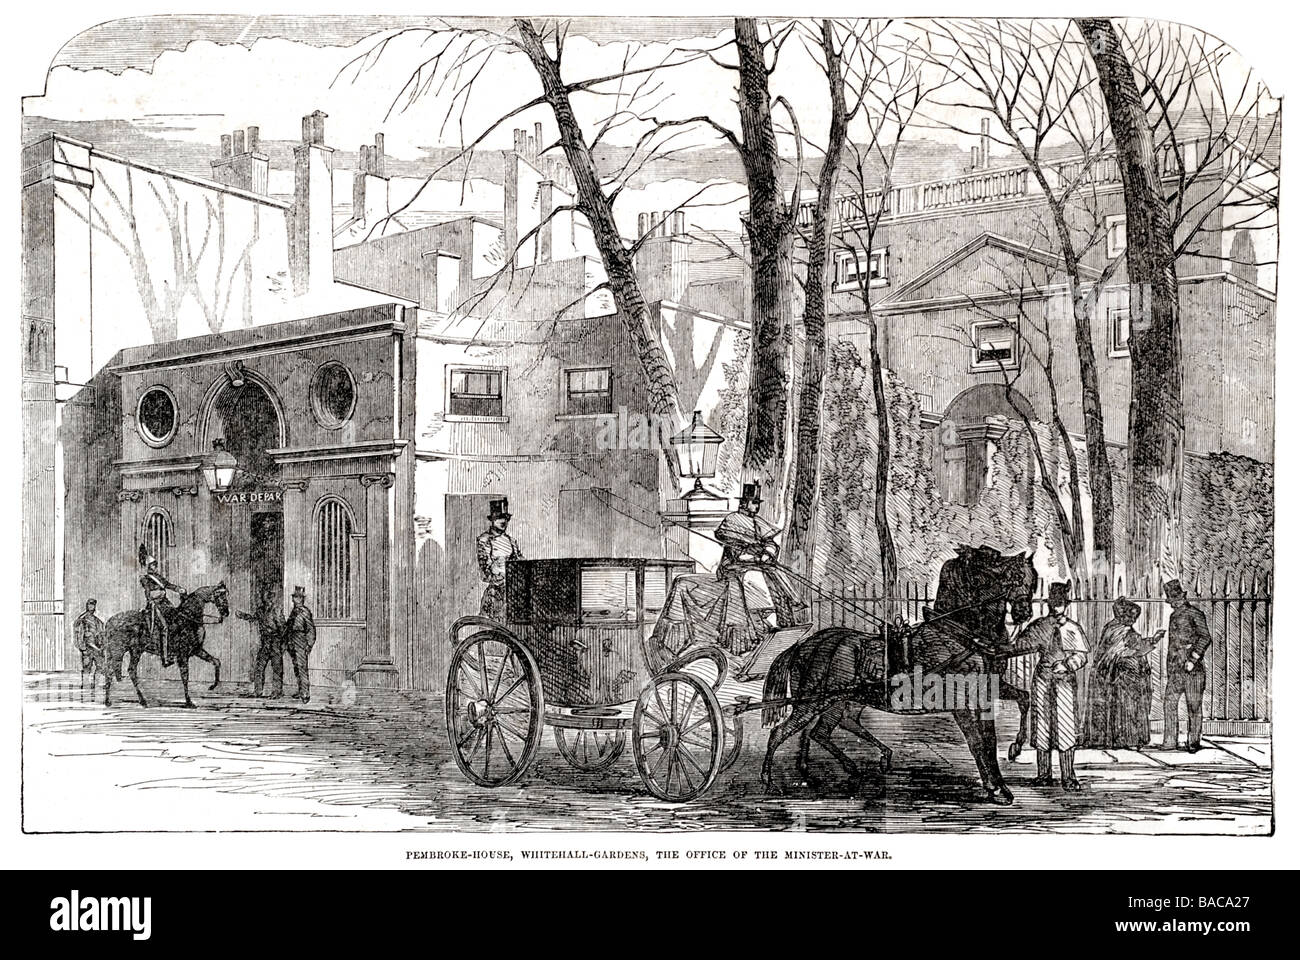 pembroke house whitehall gardens the office of the minister at war 1854 Stock Photo